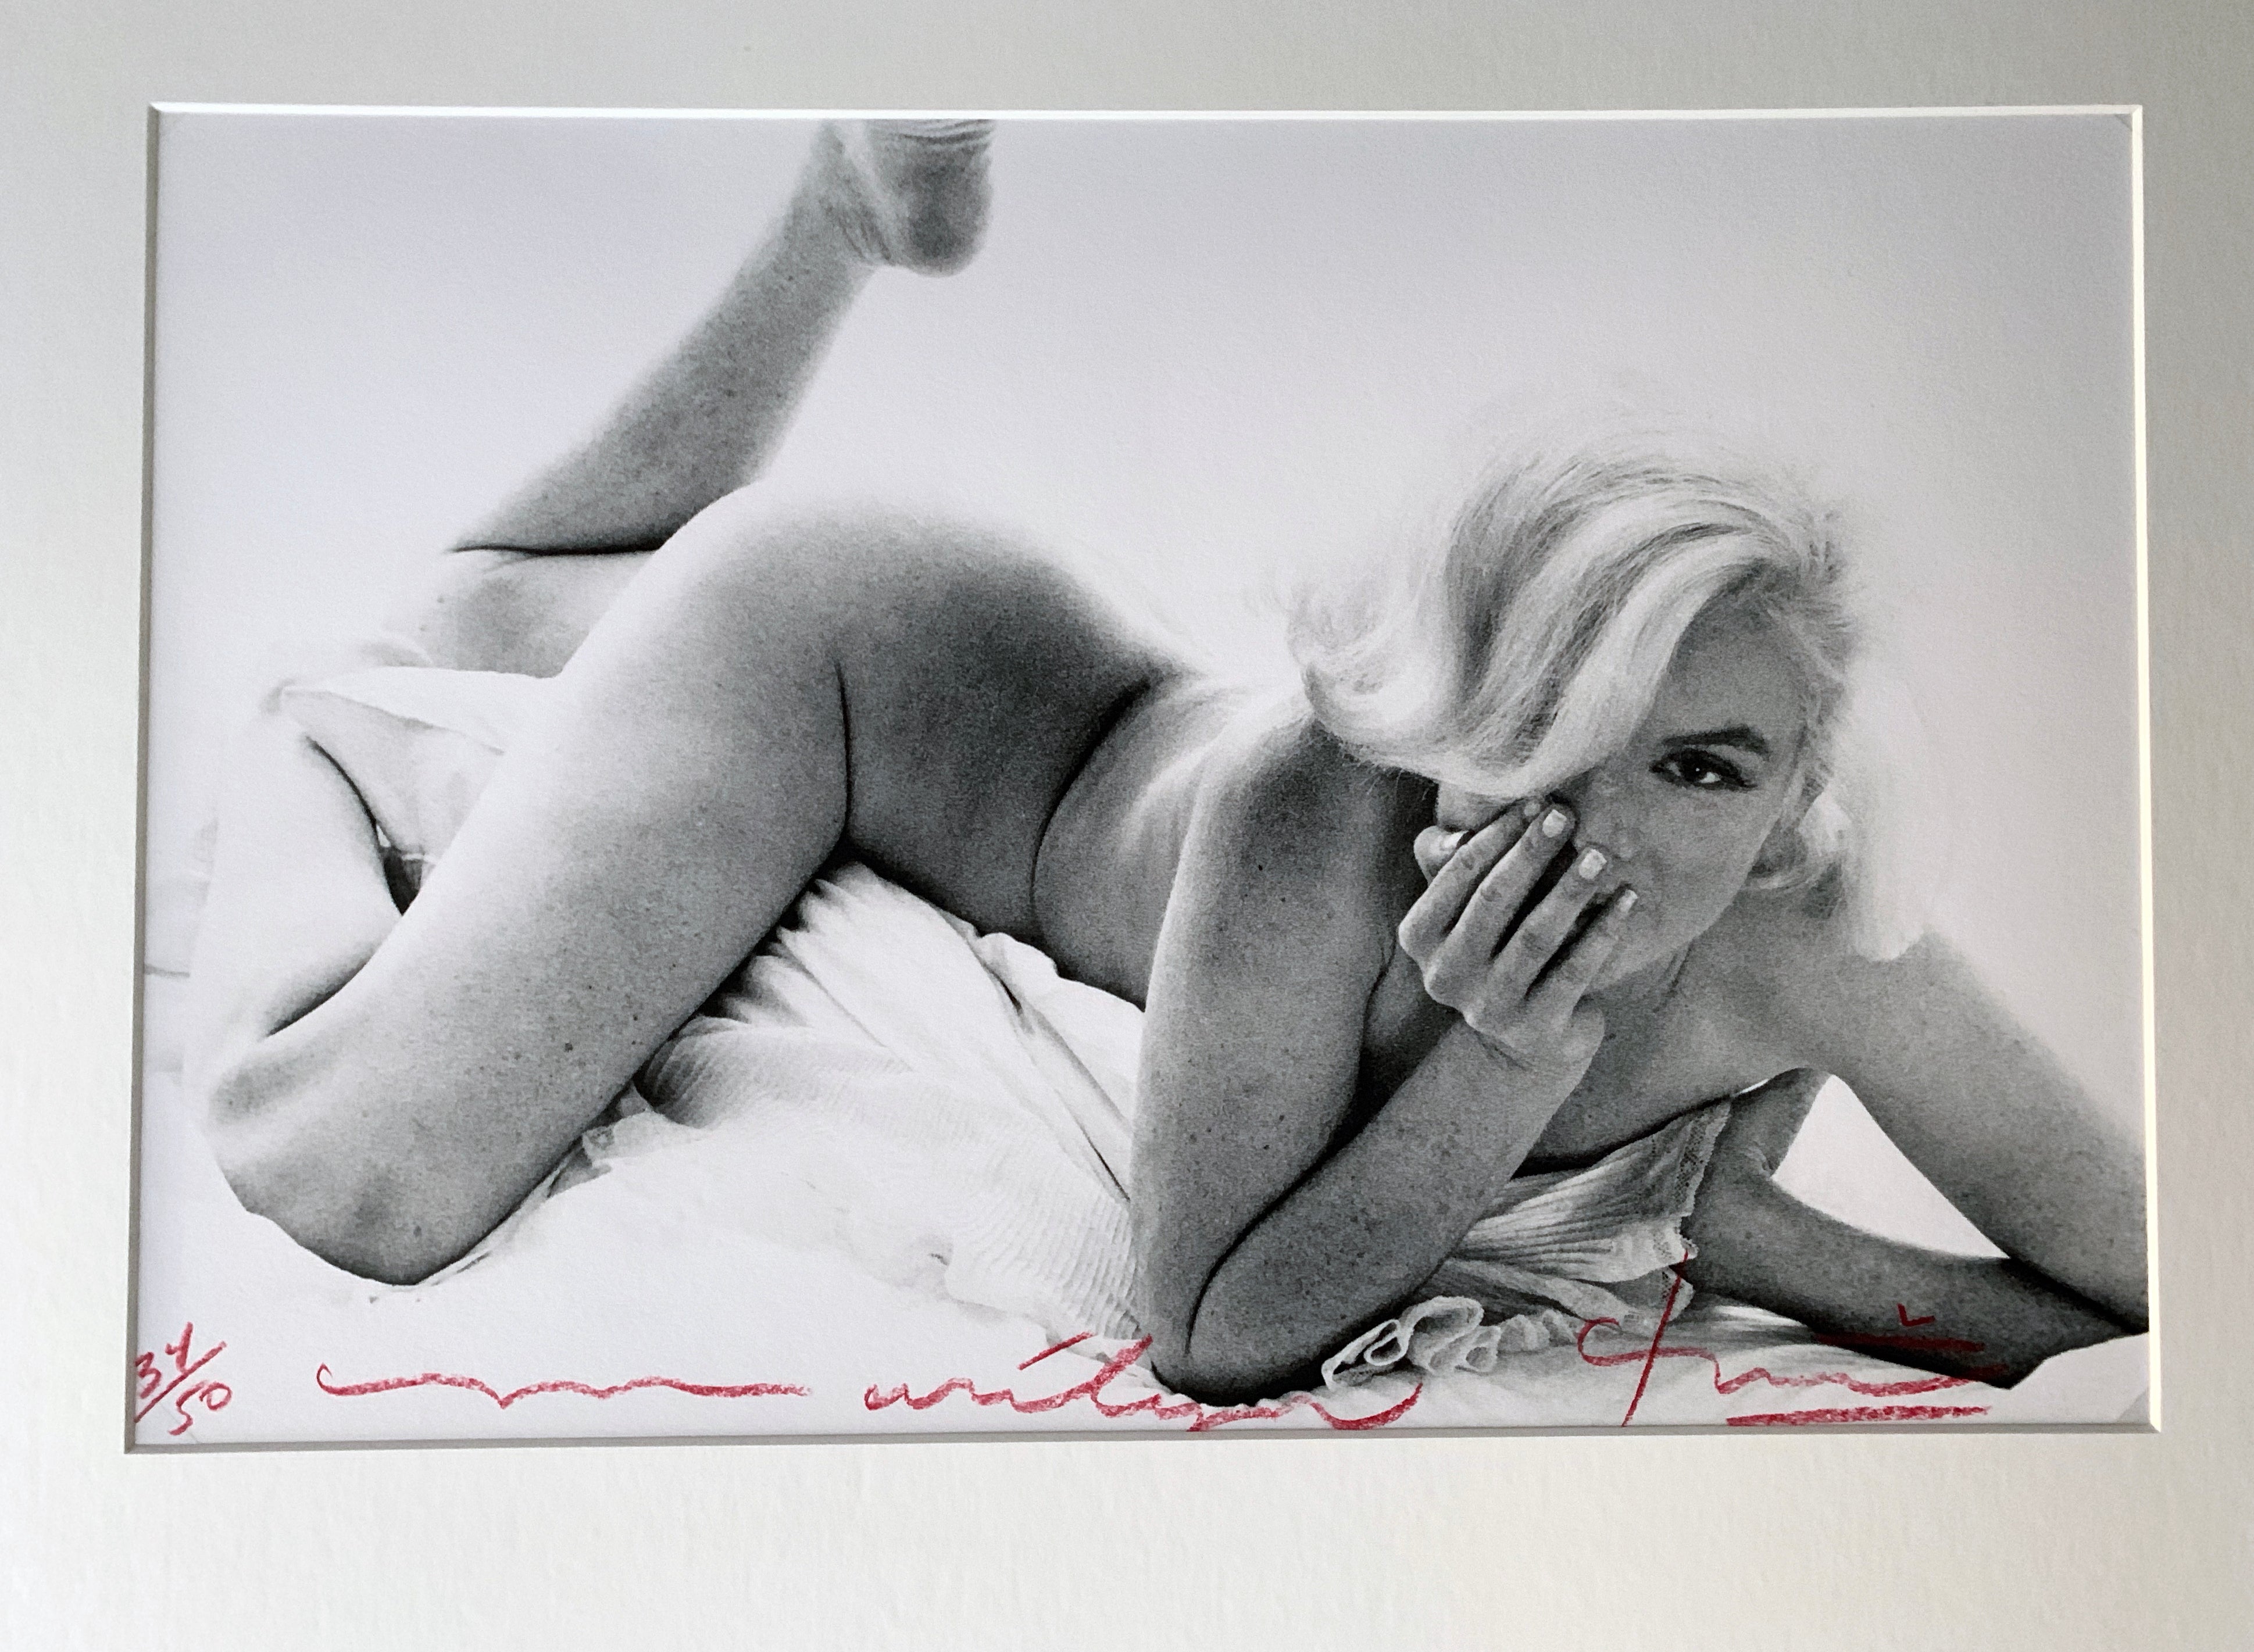 A lost marilyn monroe nude scene has been uncovered iolanes.eu